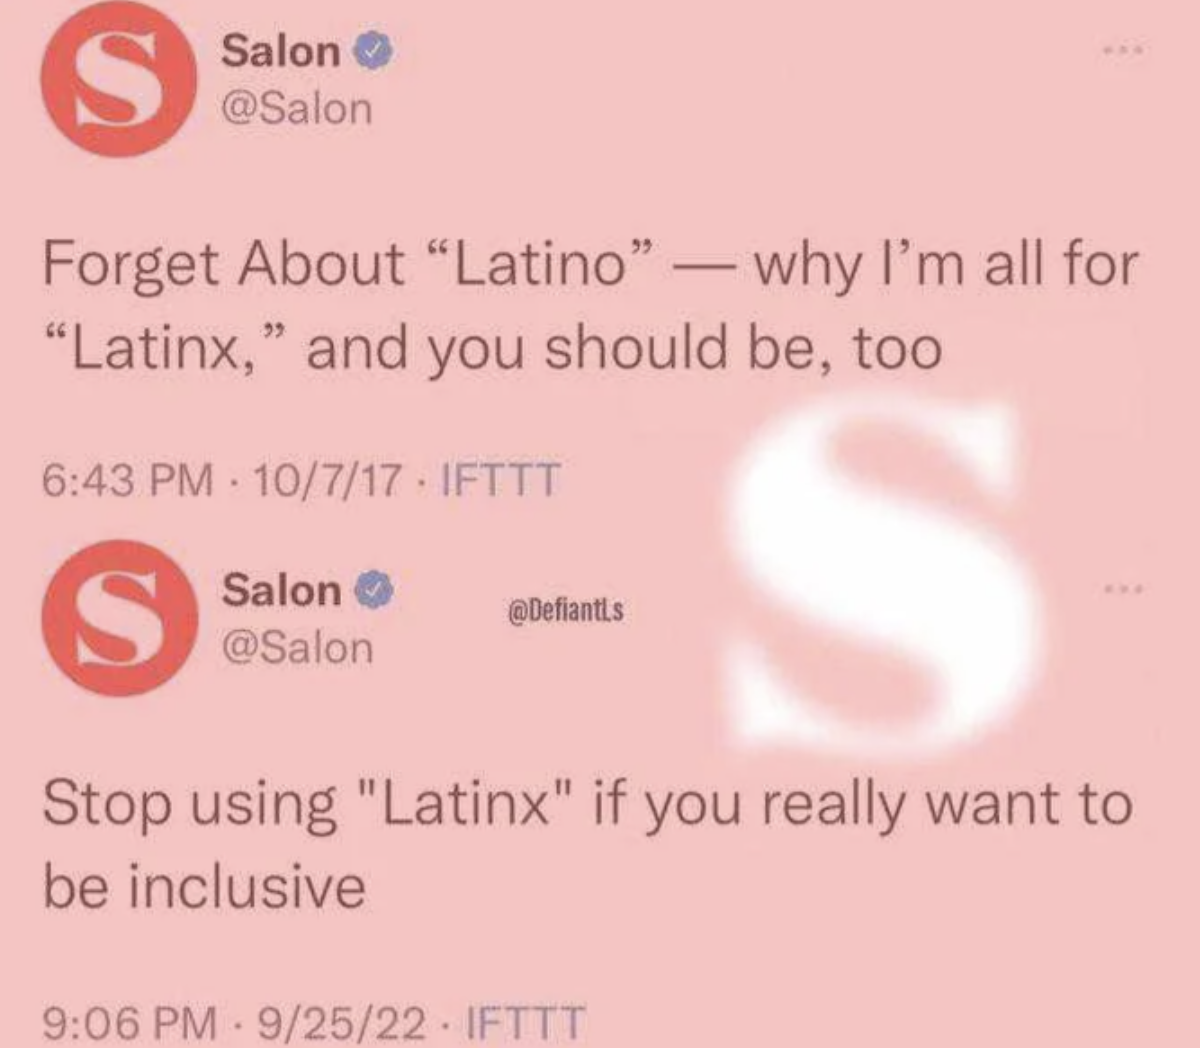 screenshot - S Salon Forget About "Latino" why I'm all for "Latinx," and you should be, too 10717 Ifttt . Salon Stop using "Latinx" if you really want to be inclusive 92522 Ifttt